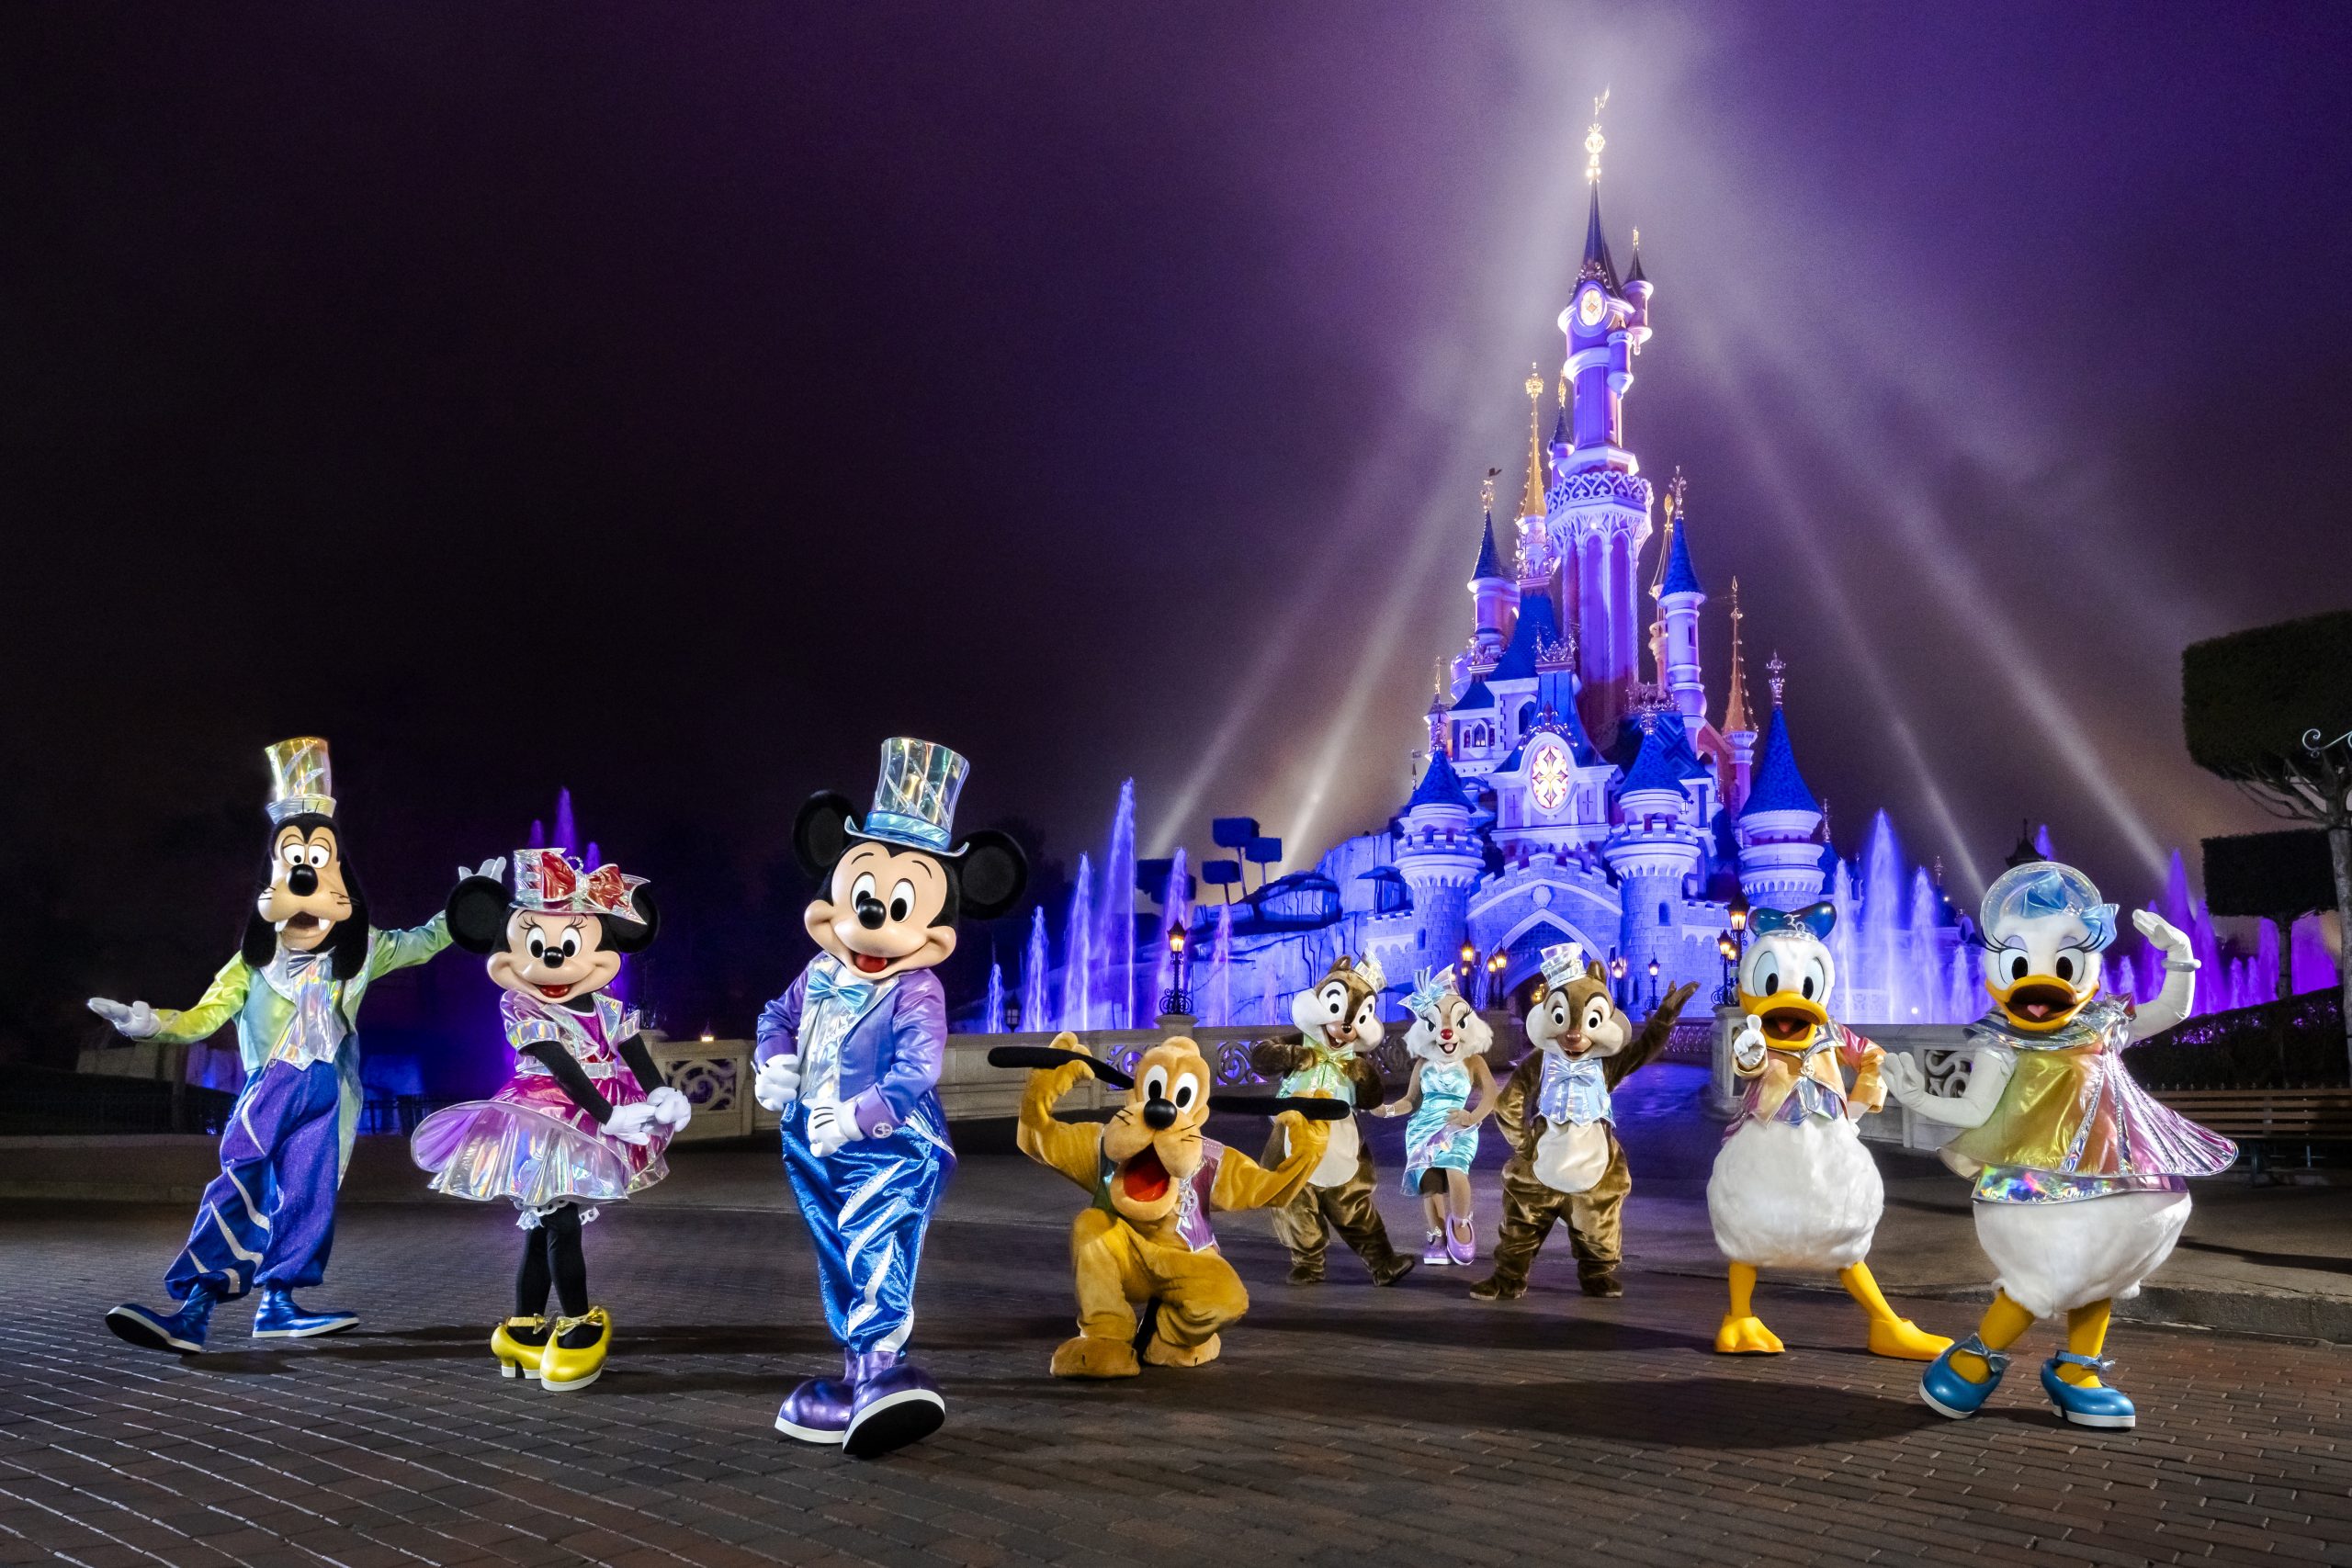 As of March 6, 2022, Disneyland Paris will celebrate its 30th